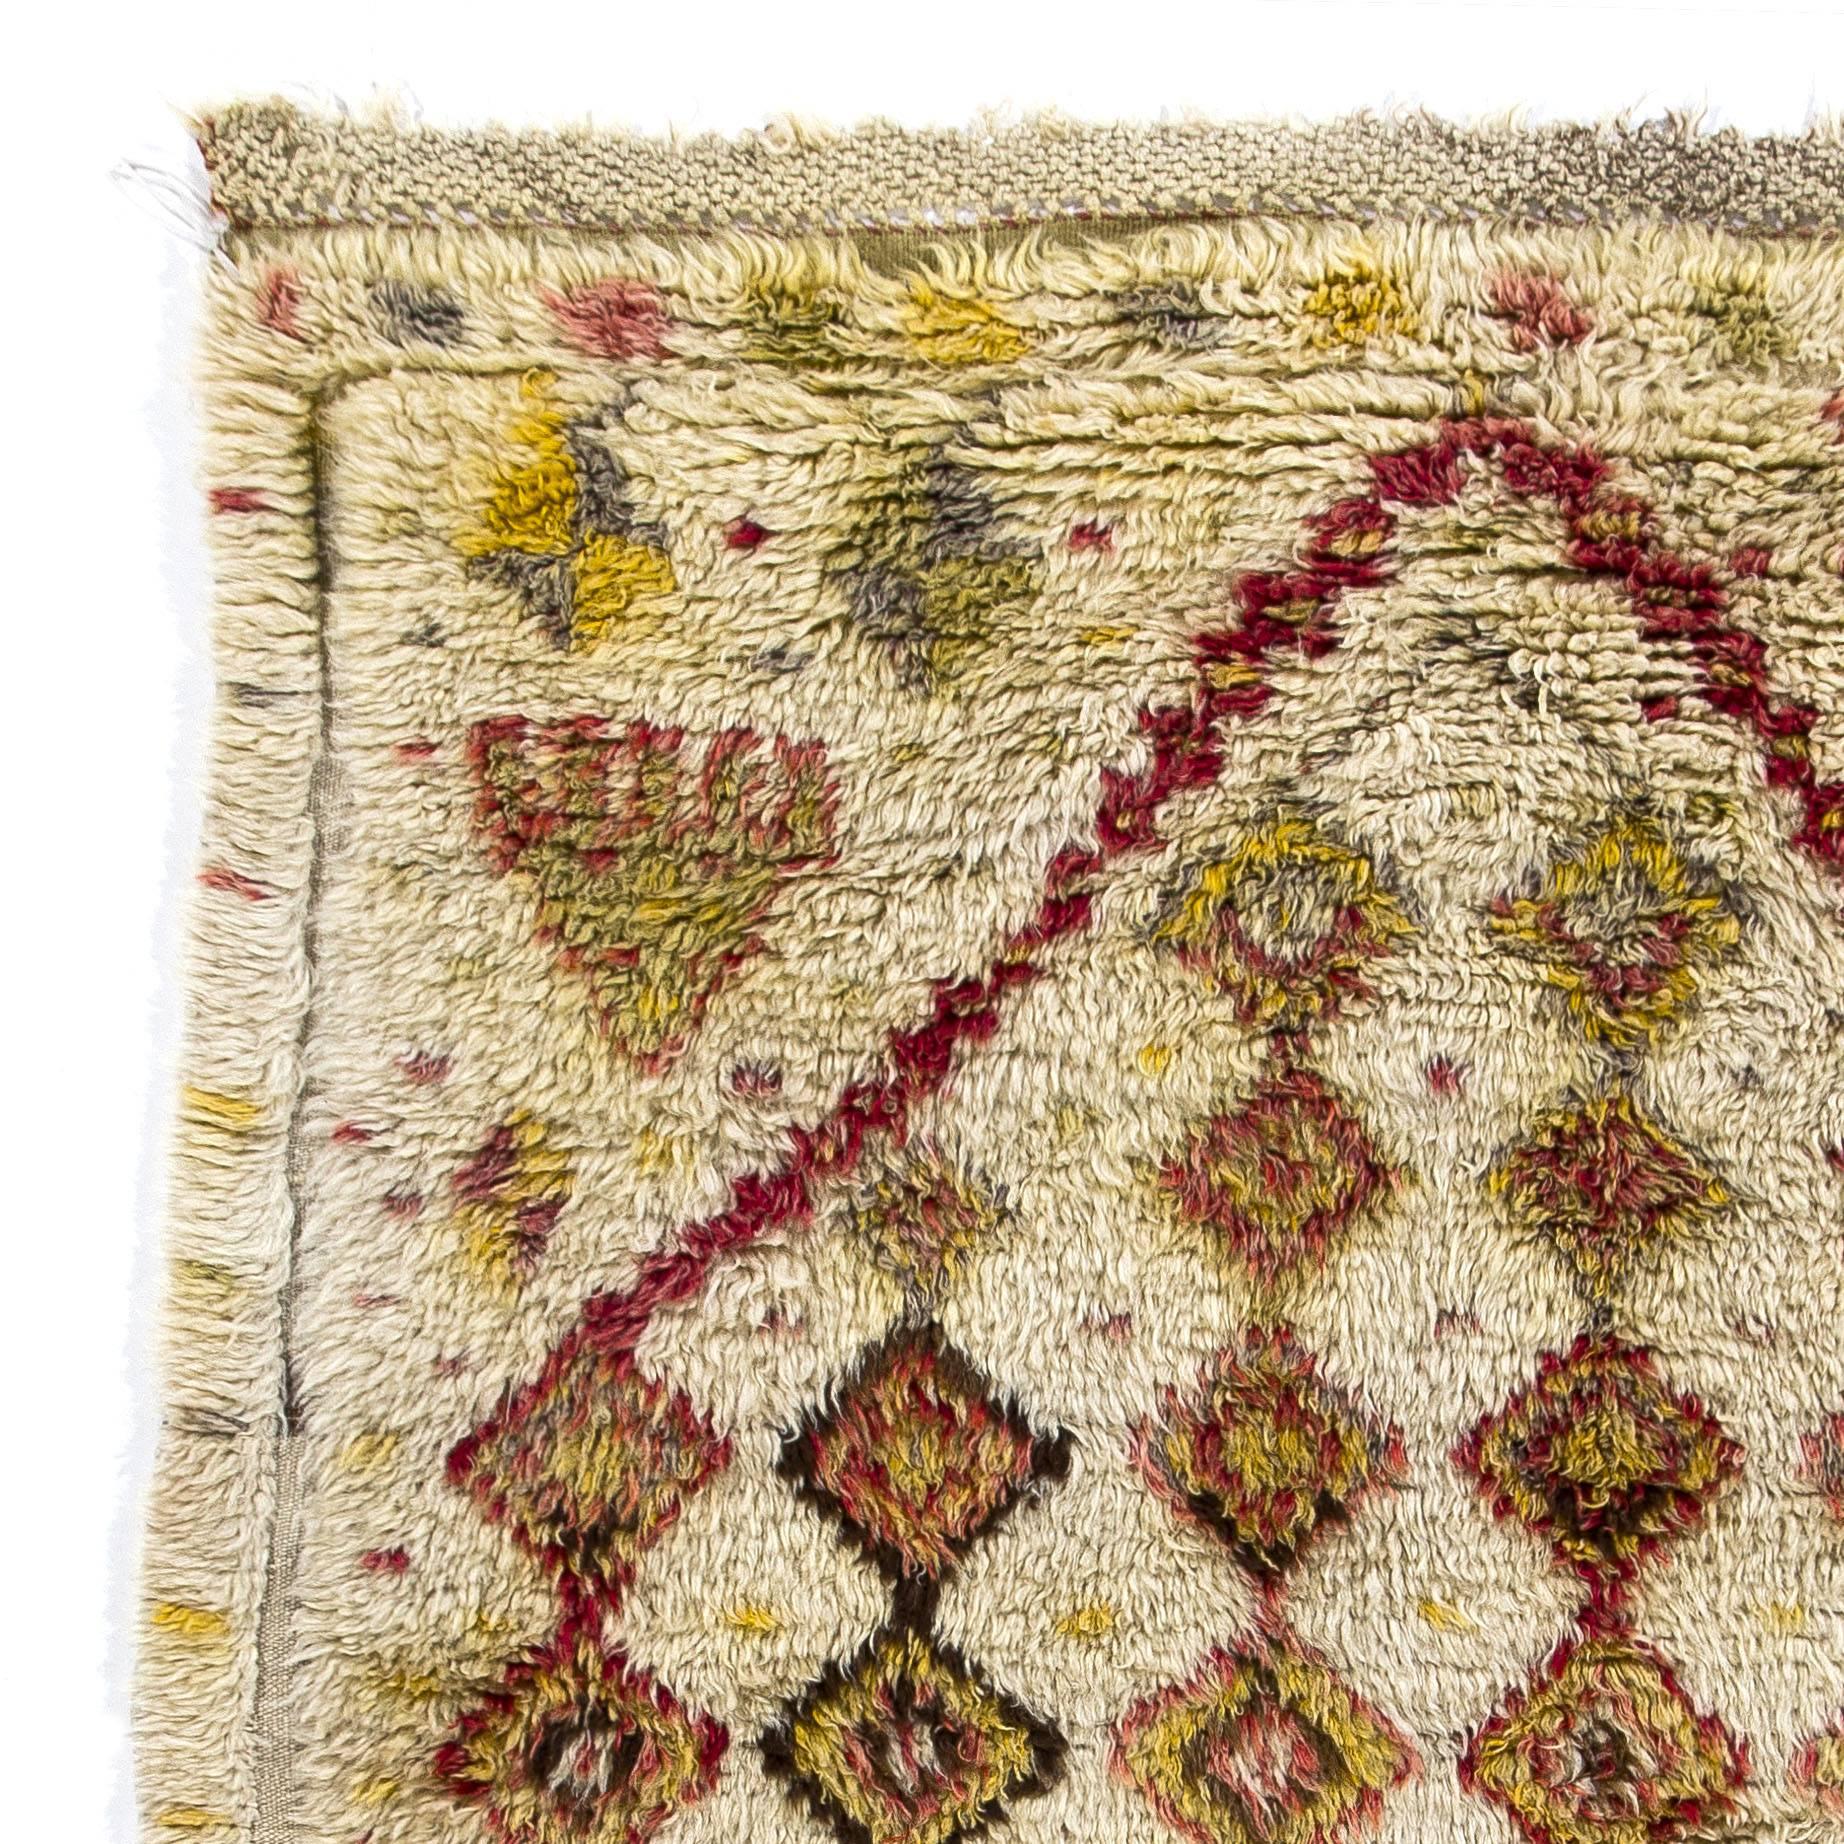 A one-of-a-kind early 20th century, Tulu, (thick-pile) rug from central Turkey with a niched design of linked and colorful lozenges 100% wool.

These rare small rugs were made for daily use by nomads and villagers in Konya region of Central